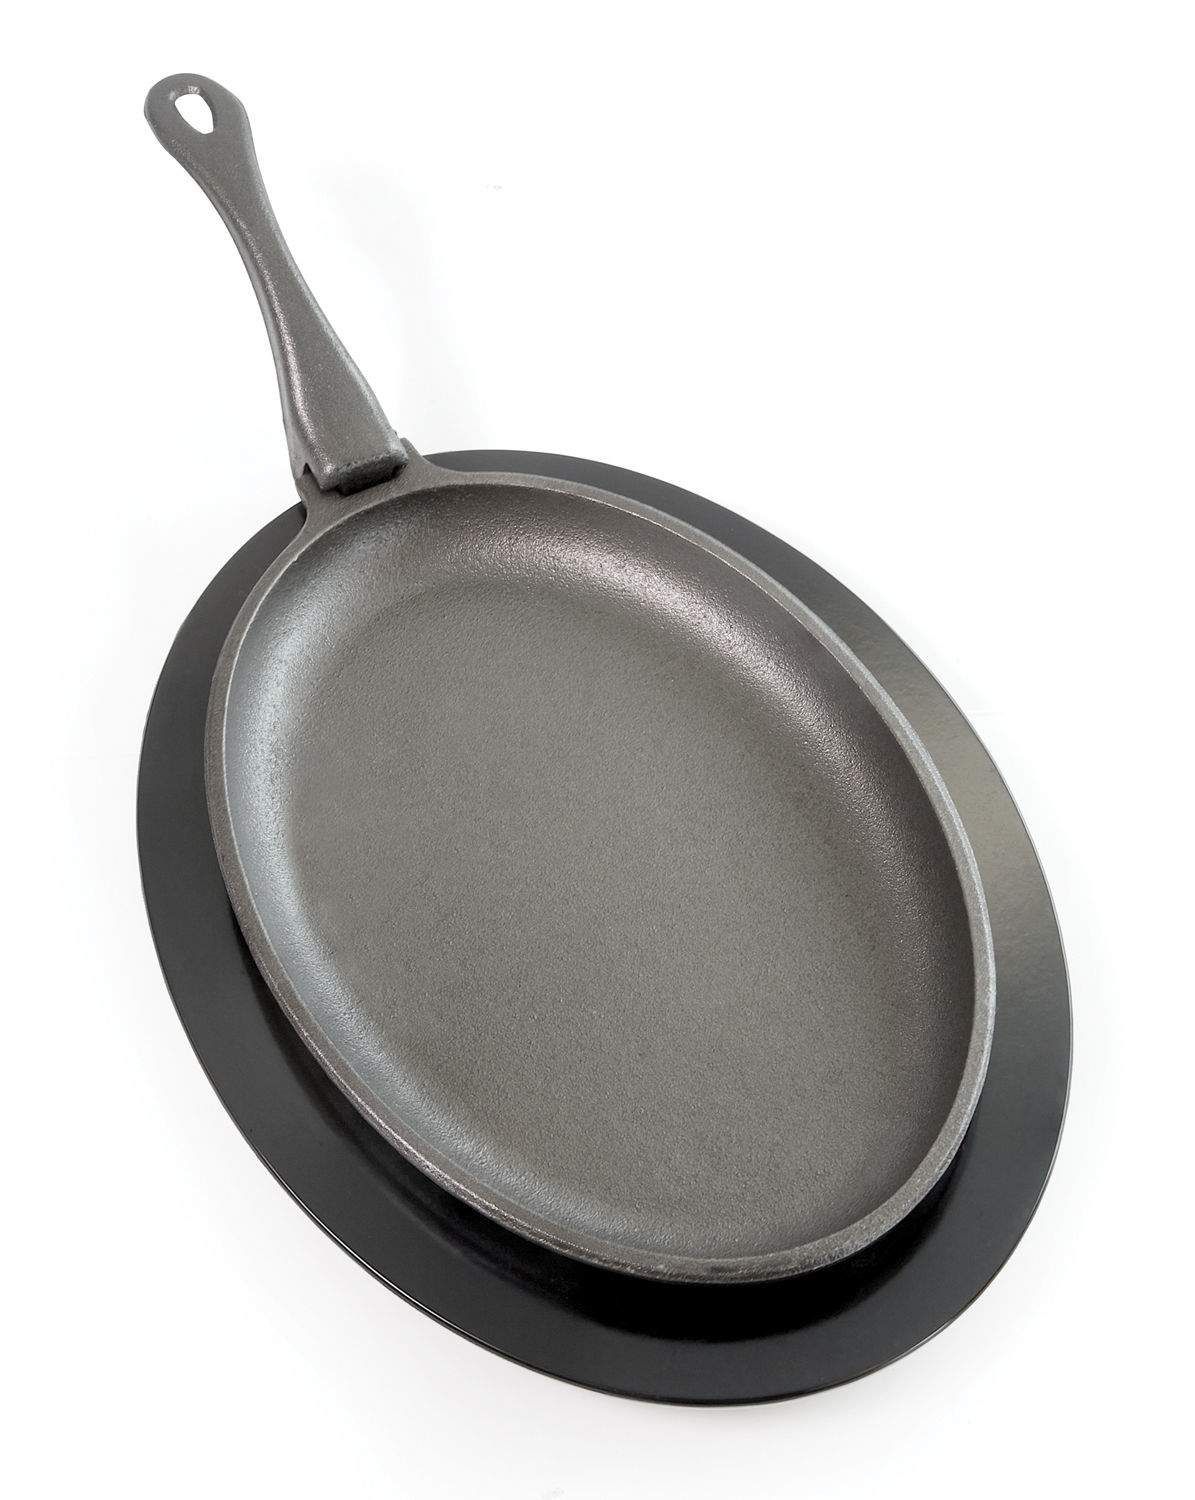 Who made this skillet? : r/castiron